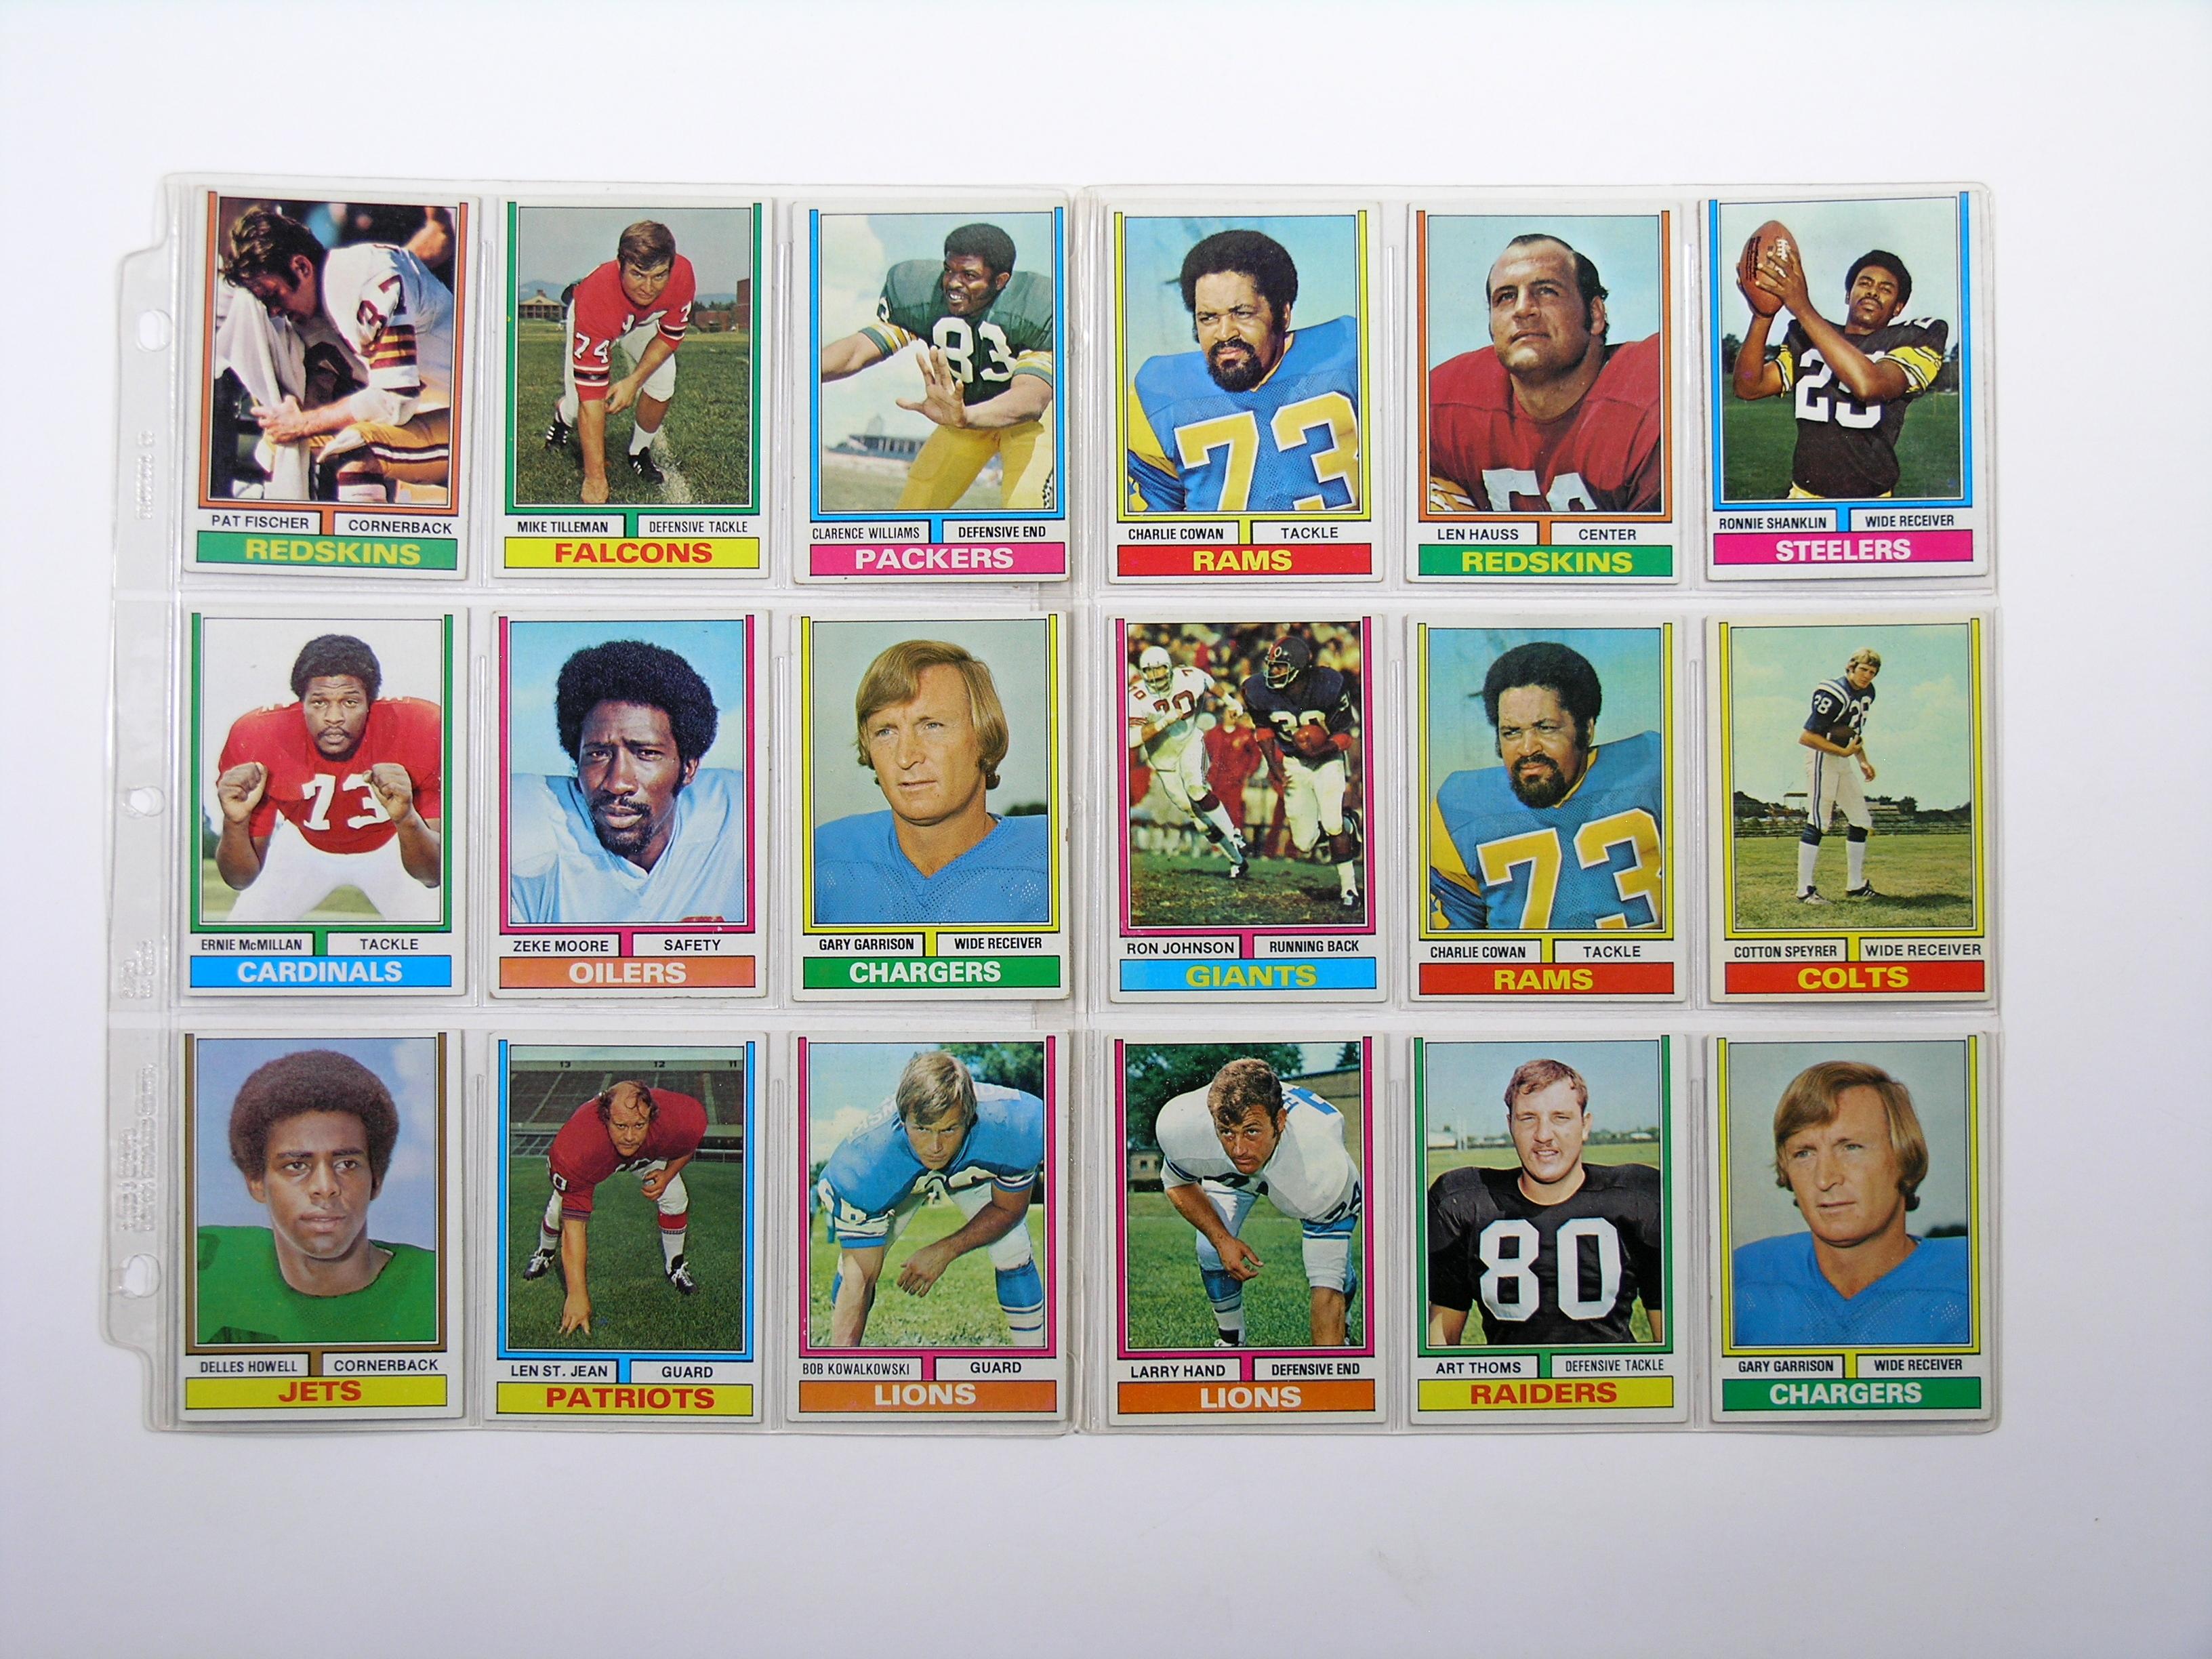 (234) 1974 Topps Football Cards VG/EX to EX conditions